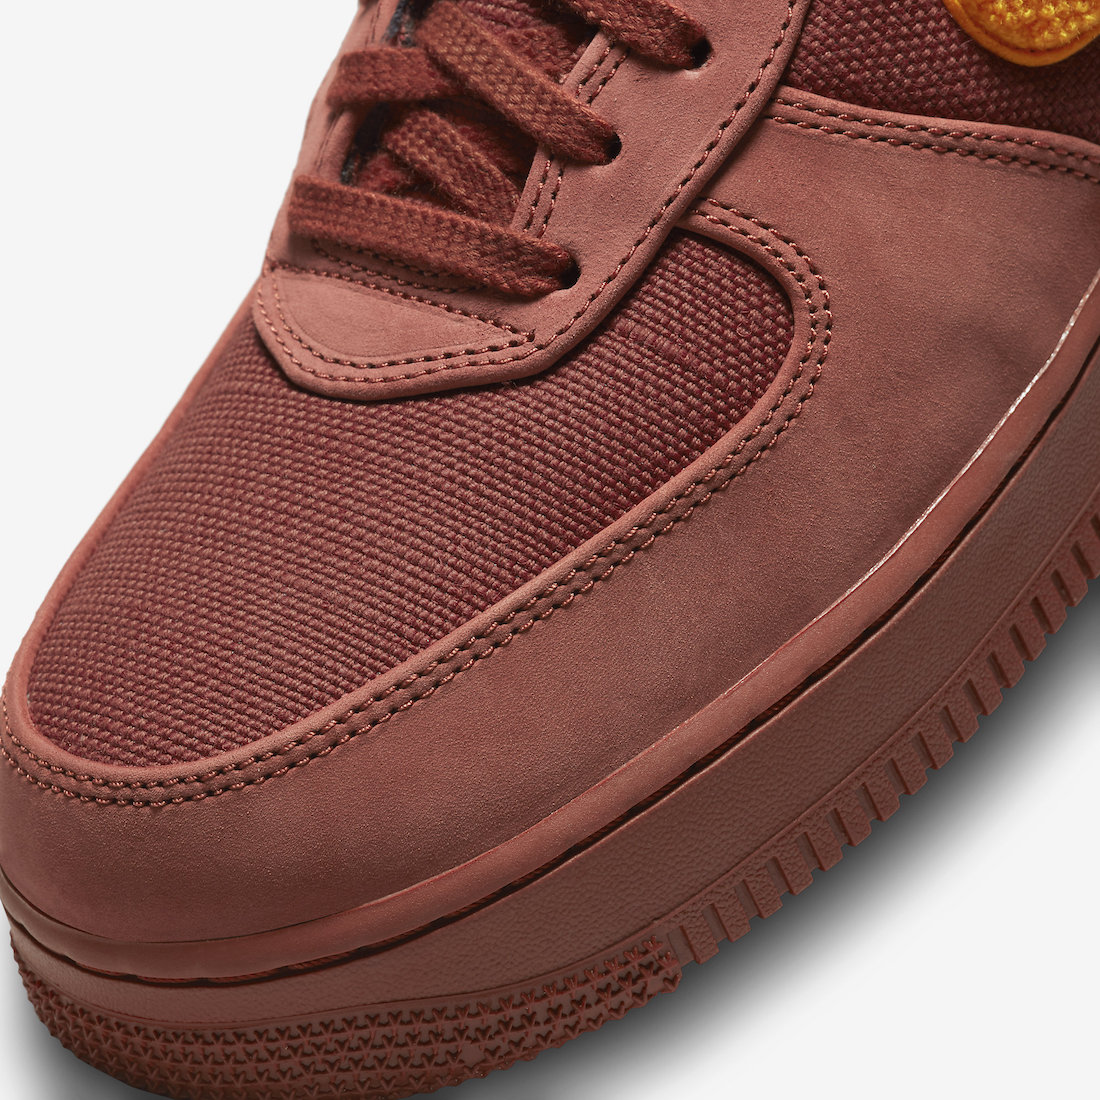 Nike Air Force 1 Low Familia DV5153-600 Release Date Info